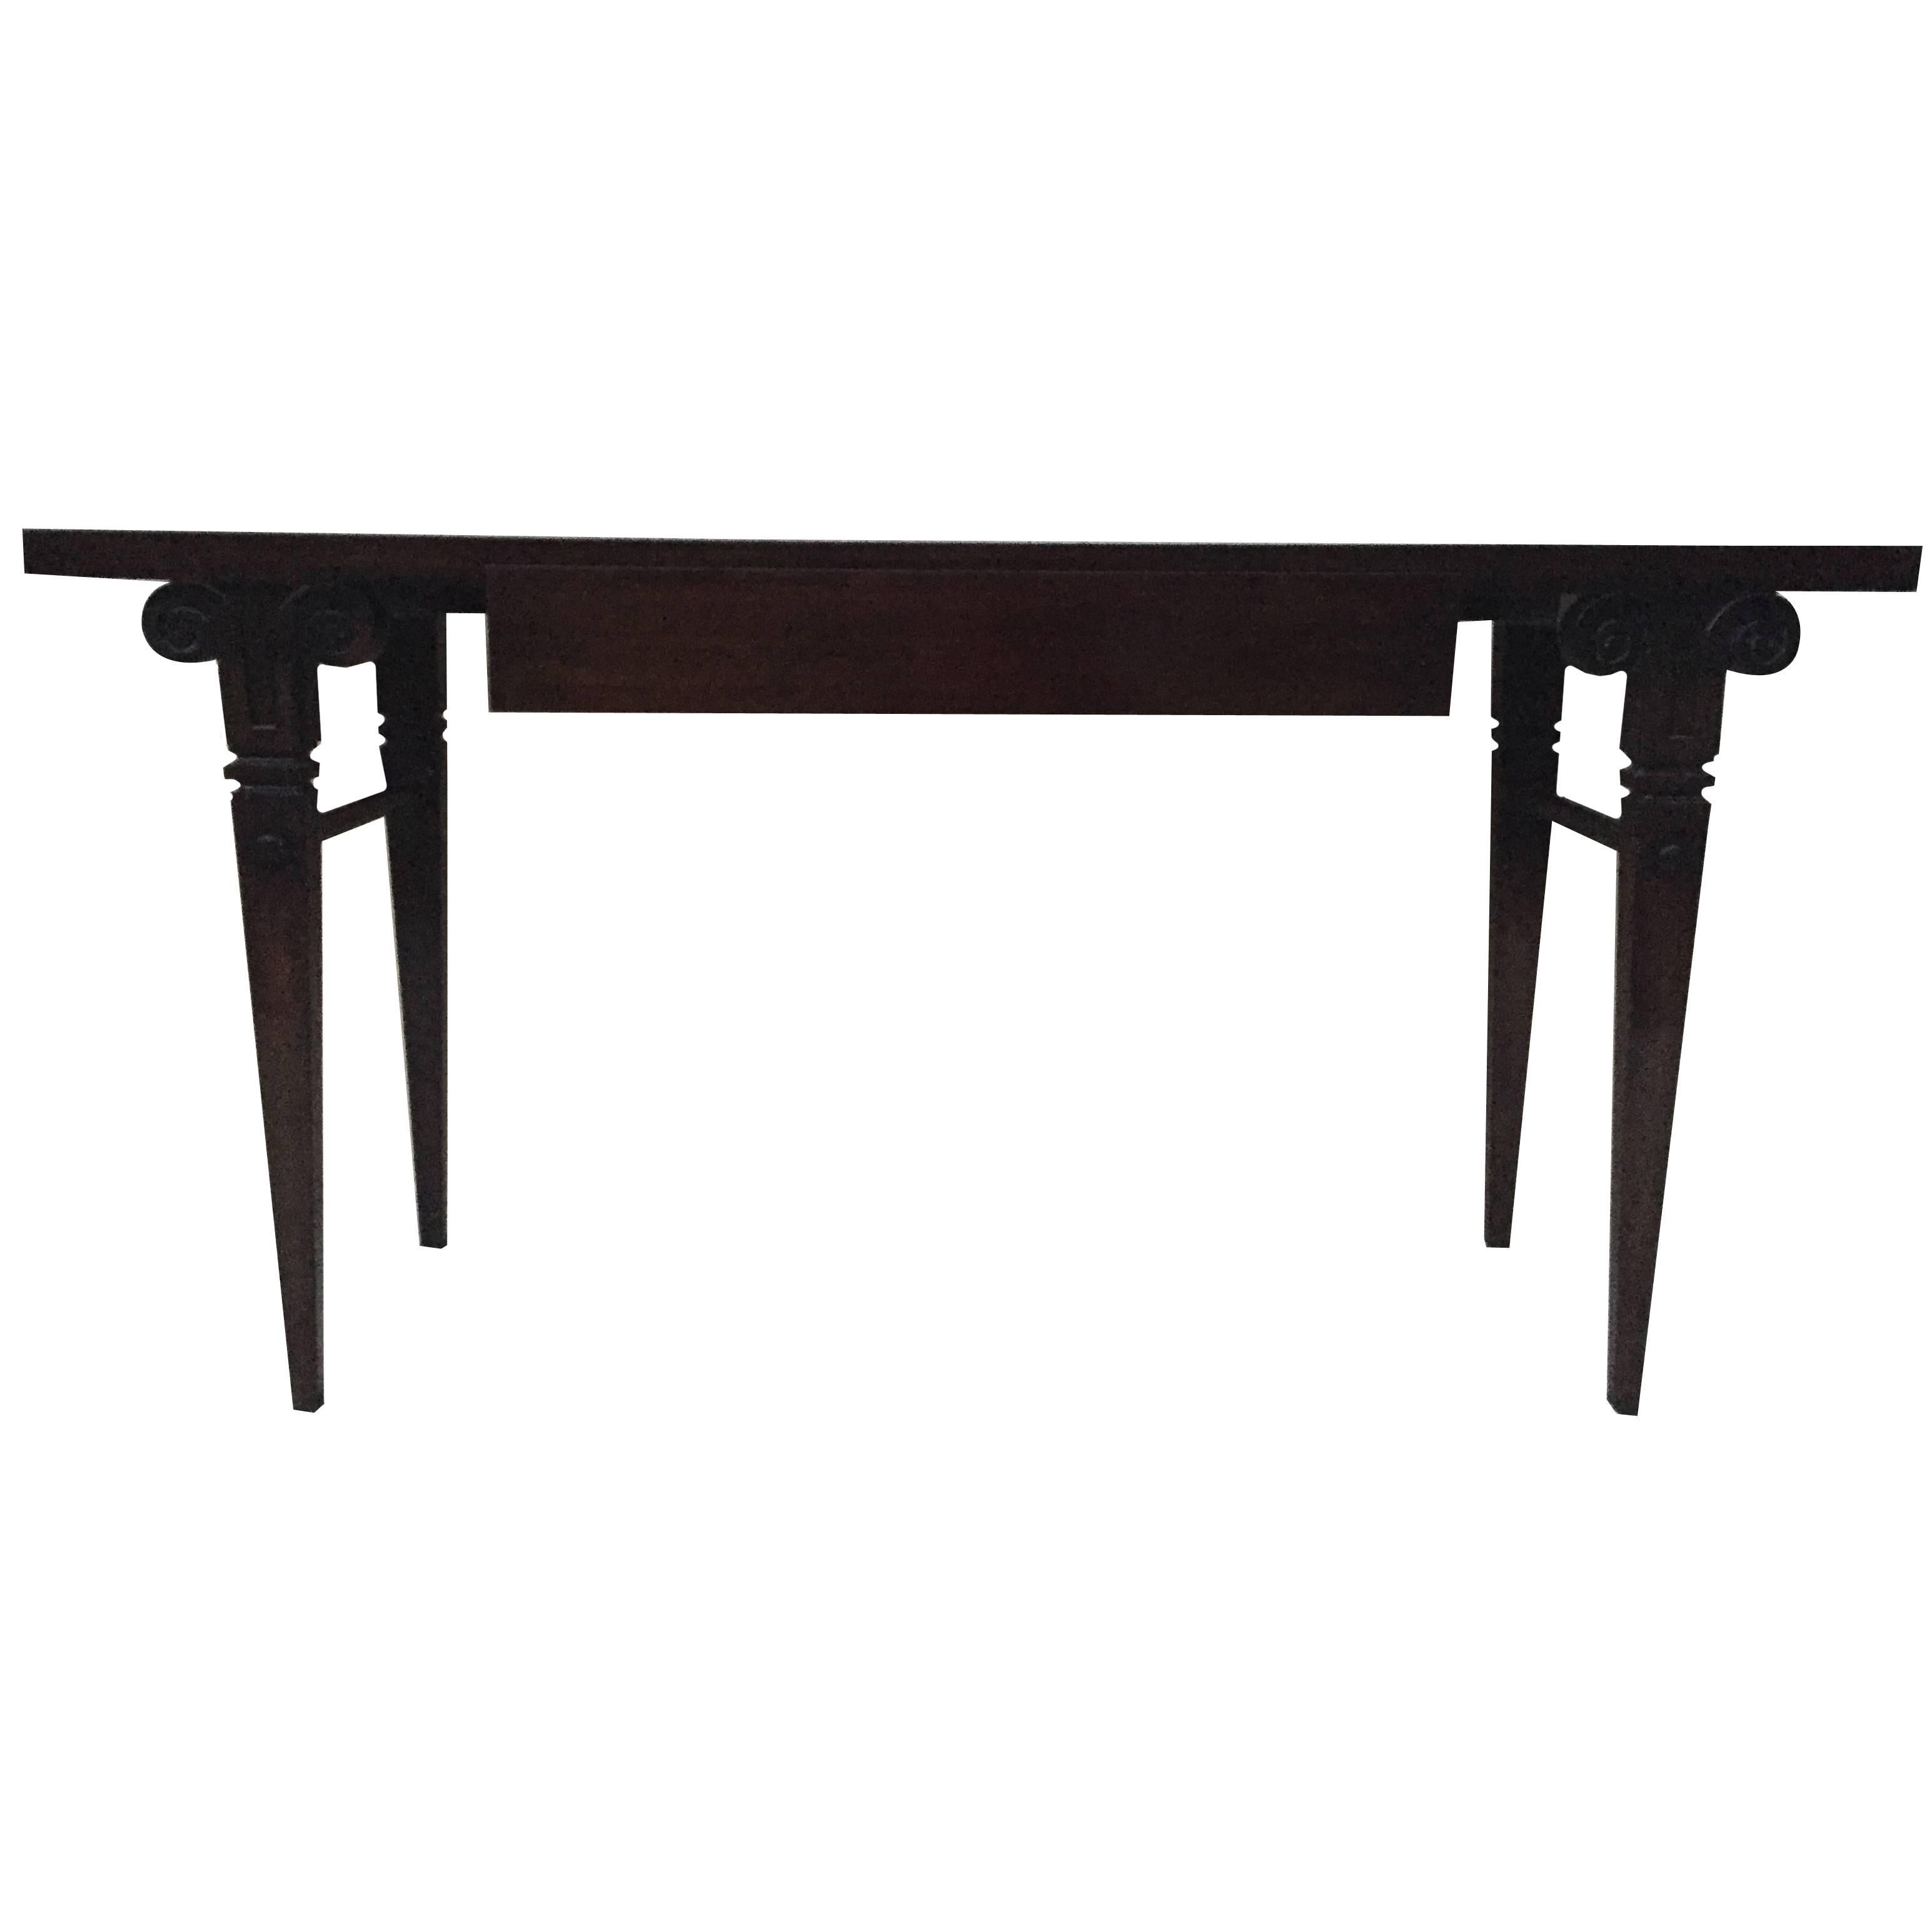 Tommi Parzinger Rams Head Console / Sofa Table